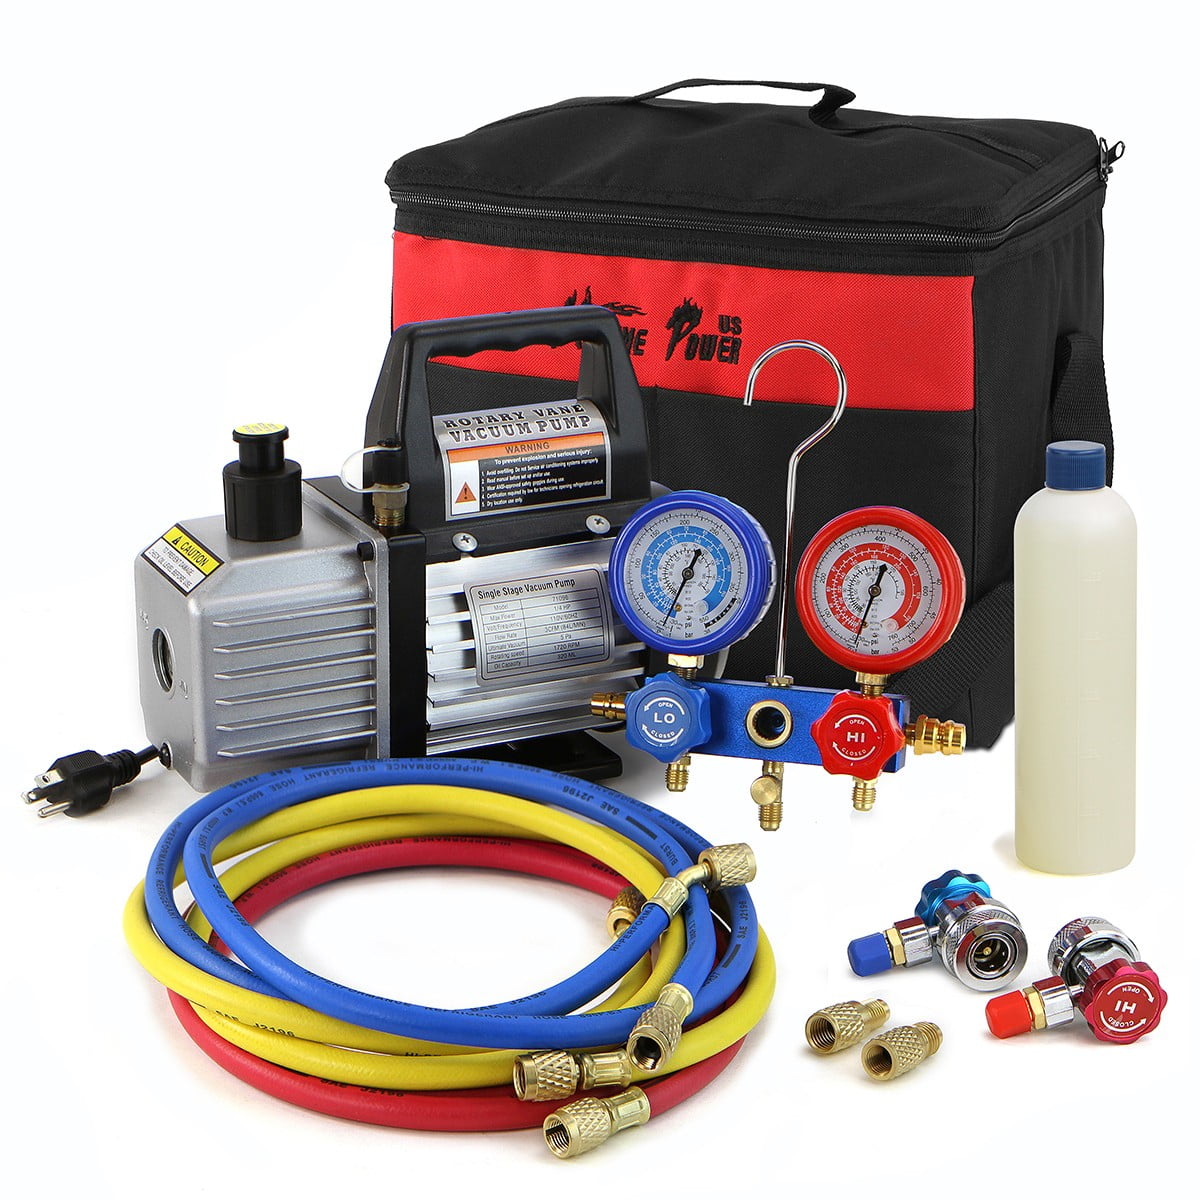 Gunson Tools Vacuum Pump for Vehicles Check Brakes Air Con  Gases On Turbos ABS 